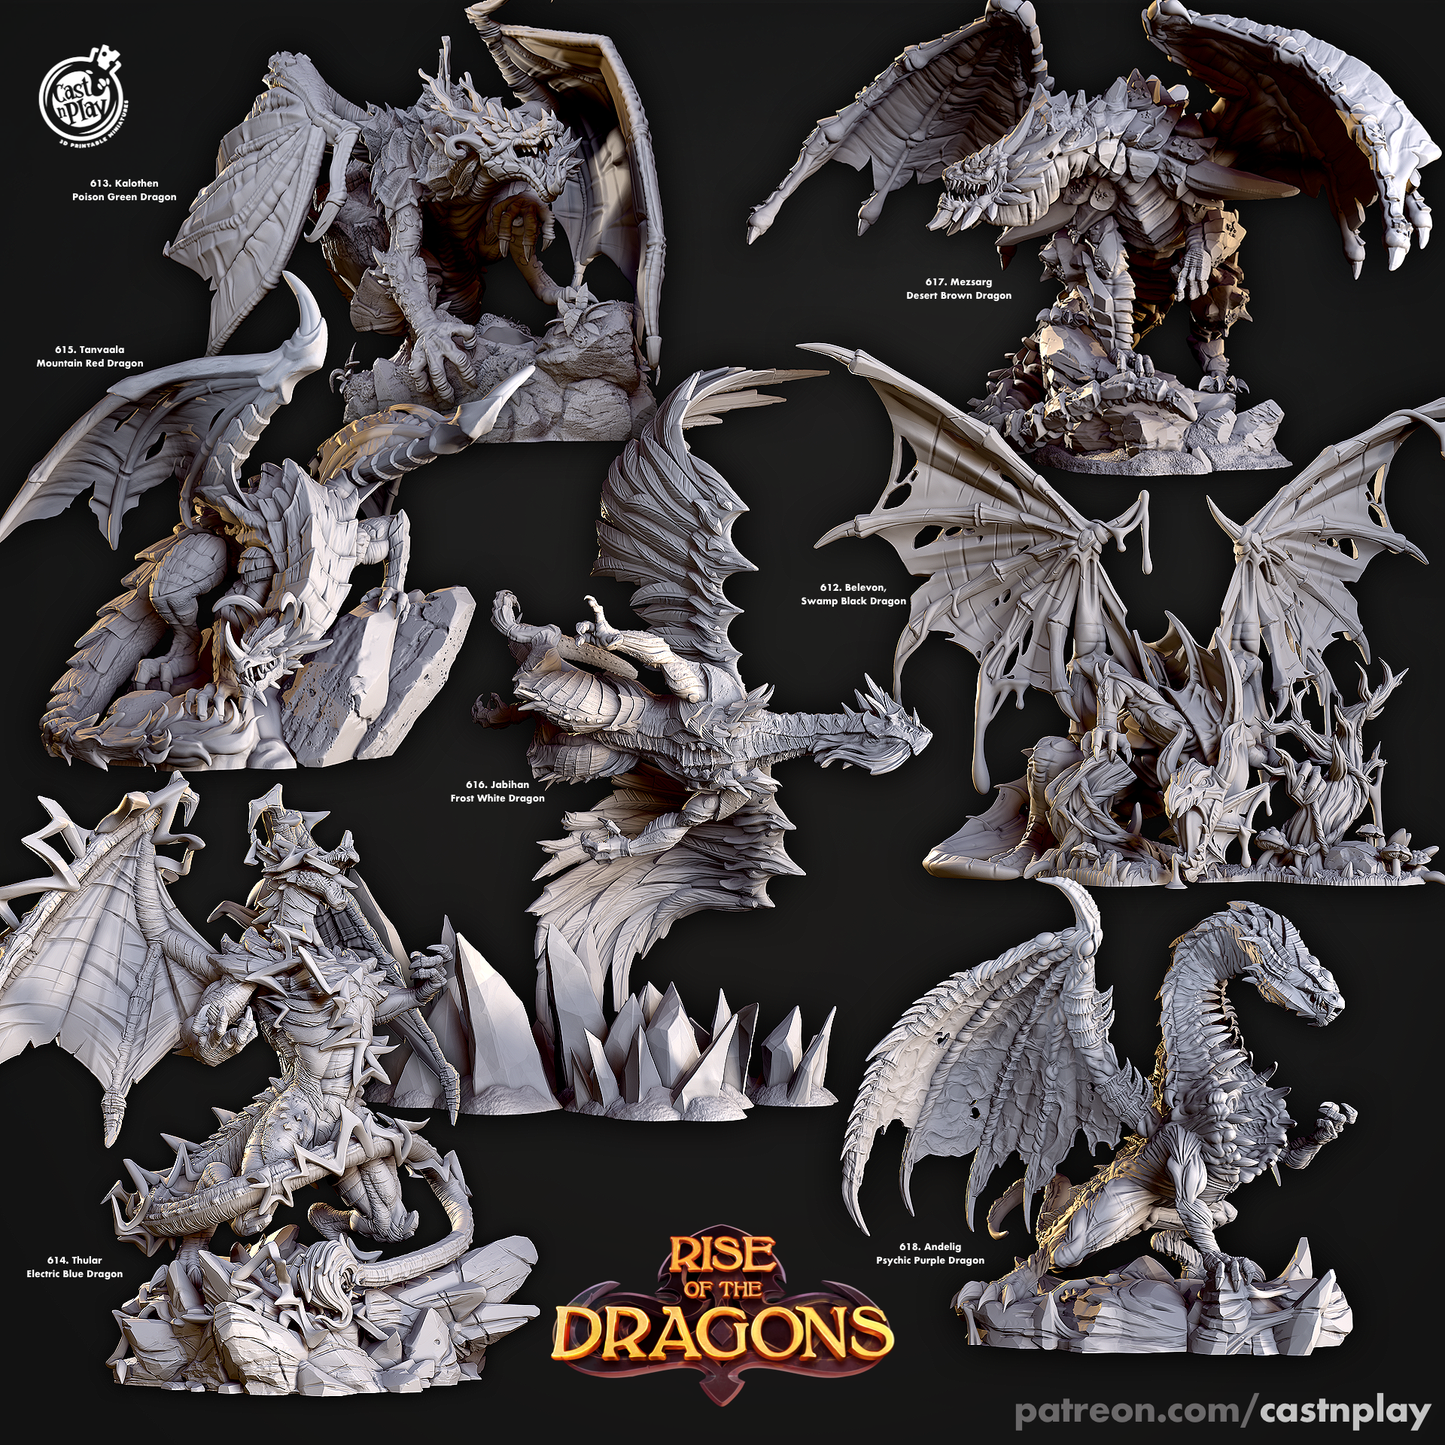 Andelig - Psychic Purple Dragon - Rise of Dragons | Cast N Play | Resin